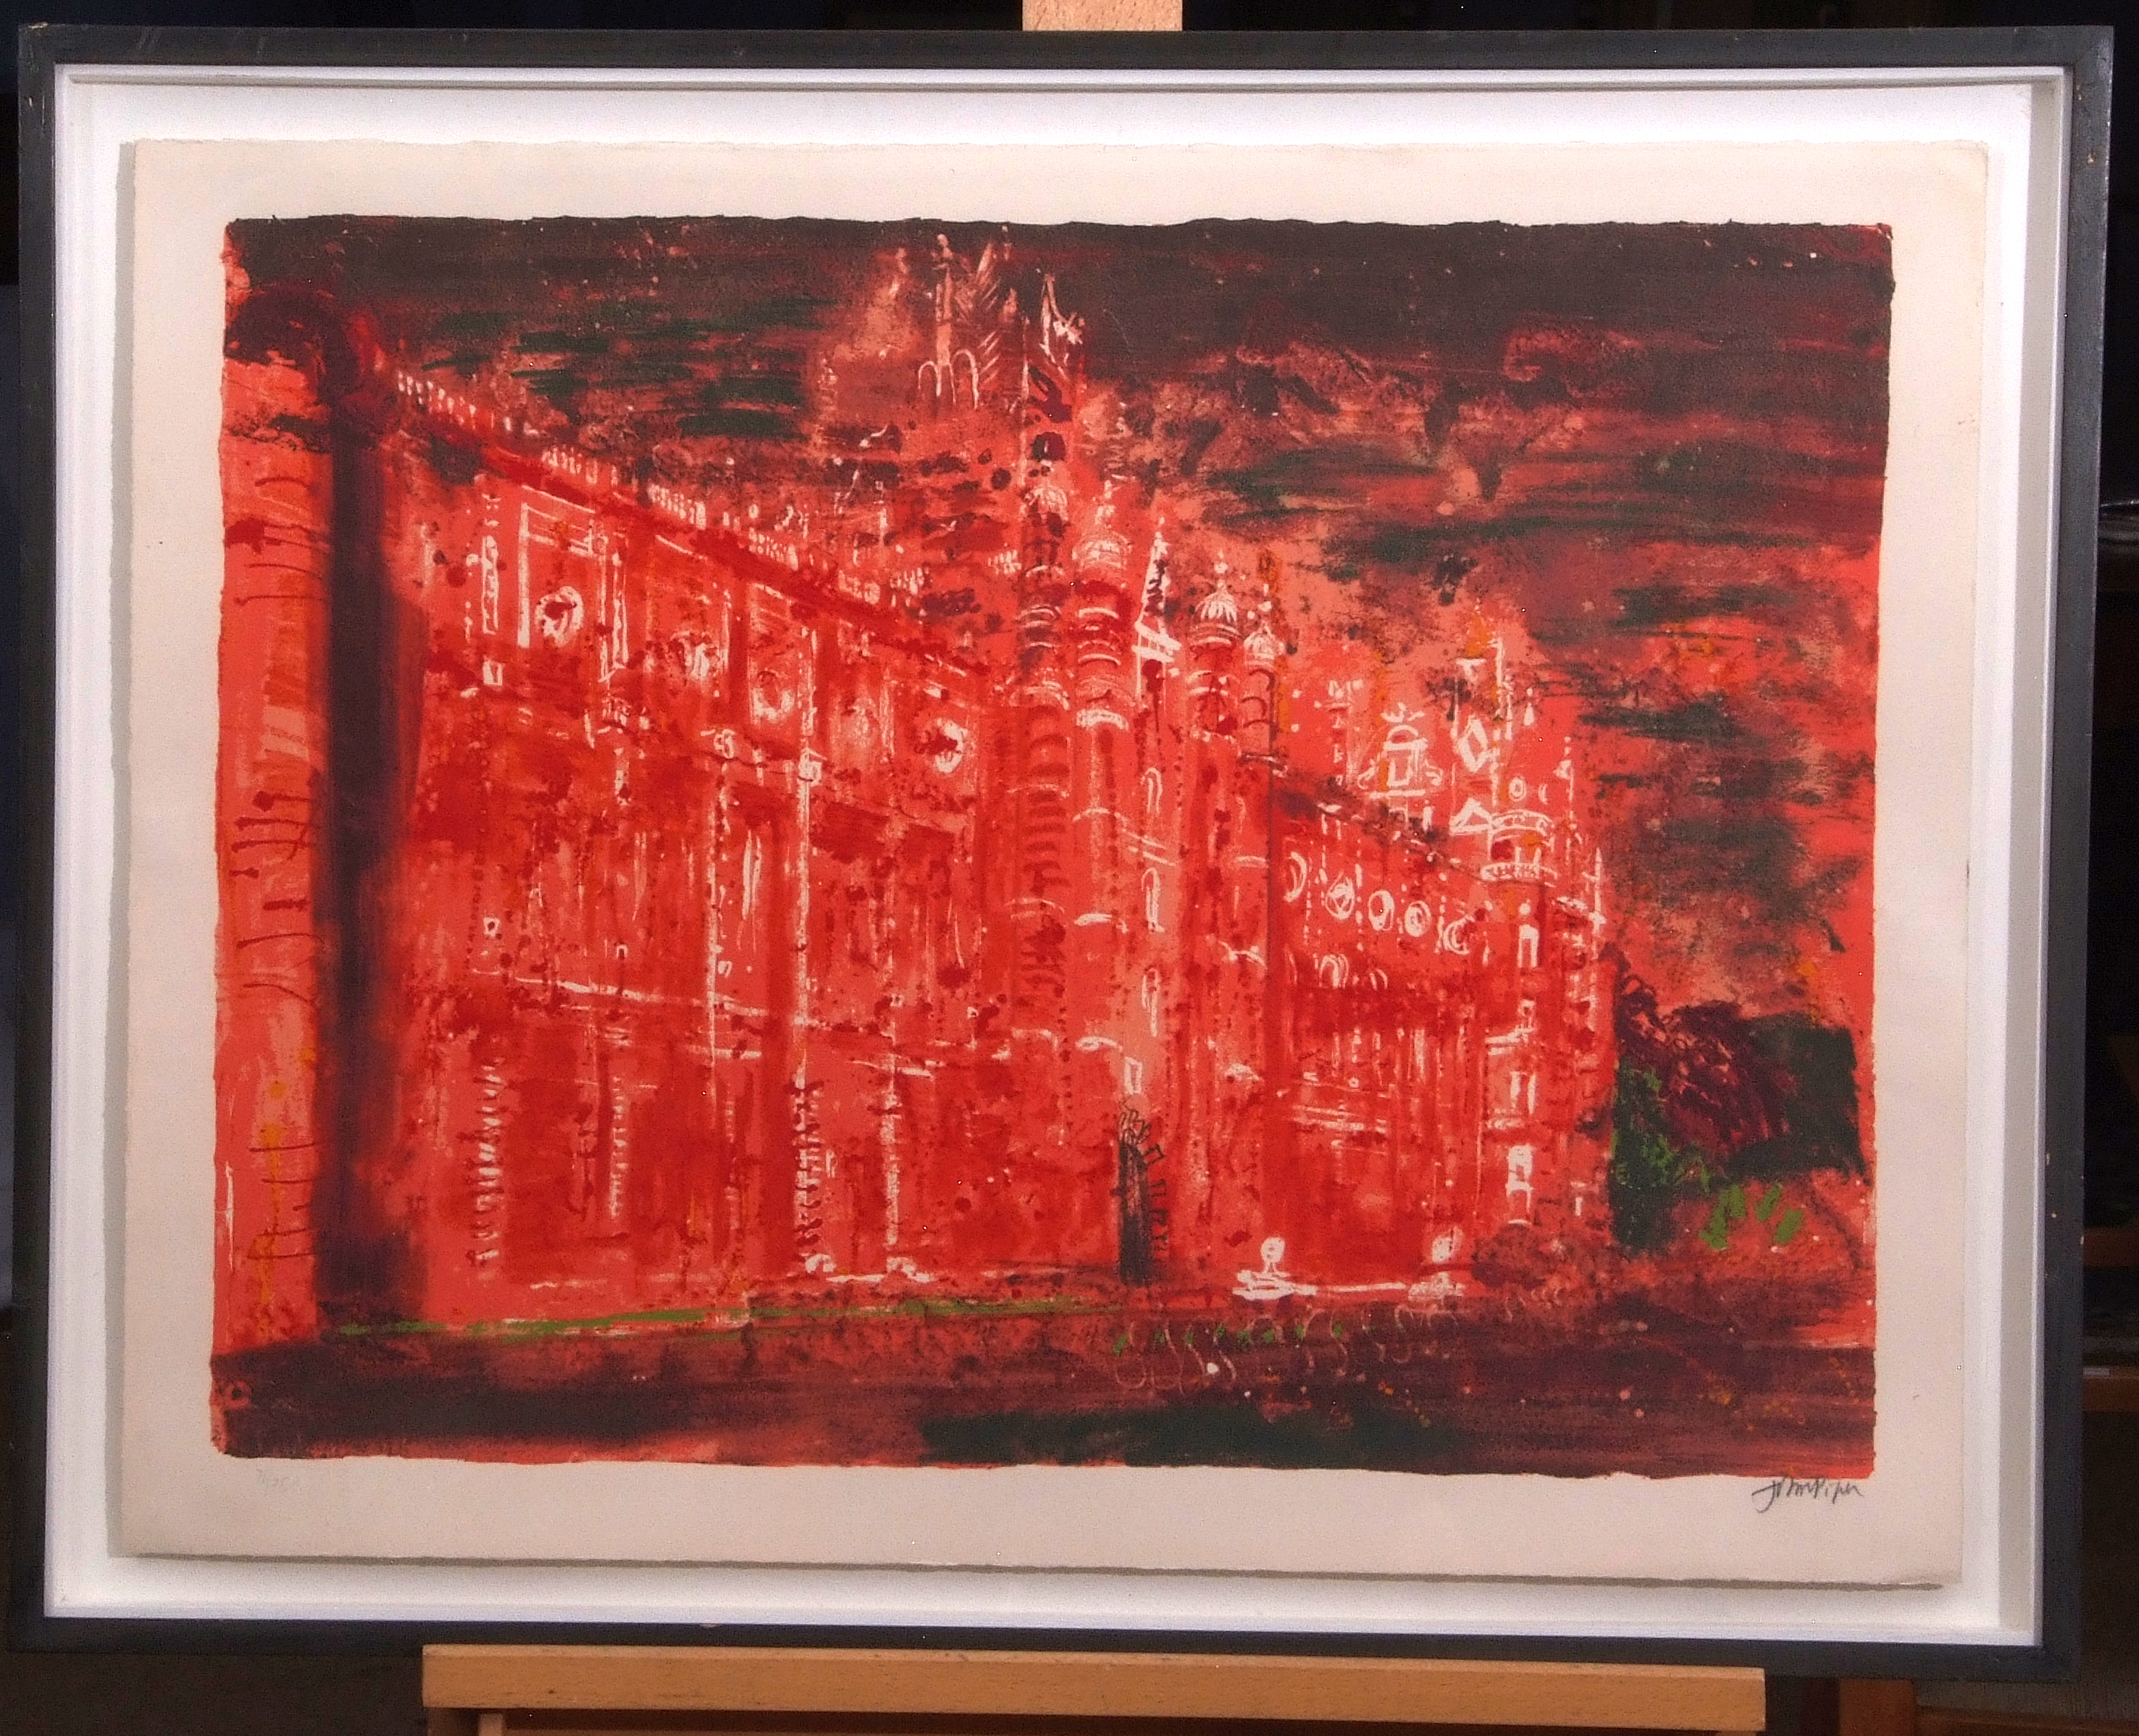 •AR John Piper, CH (1903-1992), "Royal Holloway College", screen print, signed and numbered 71/75 in - Image 2 of 2